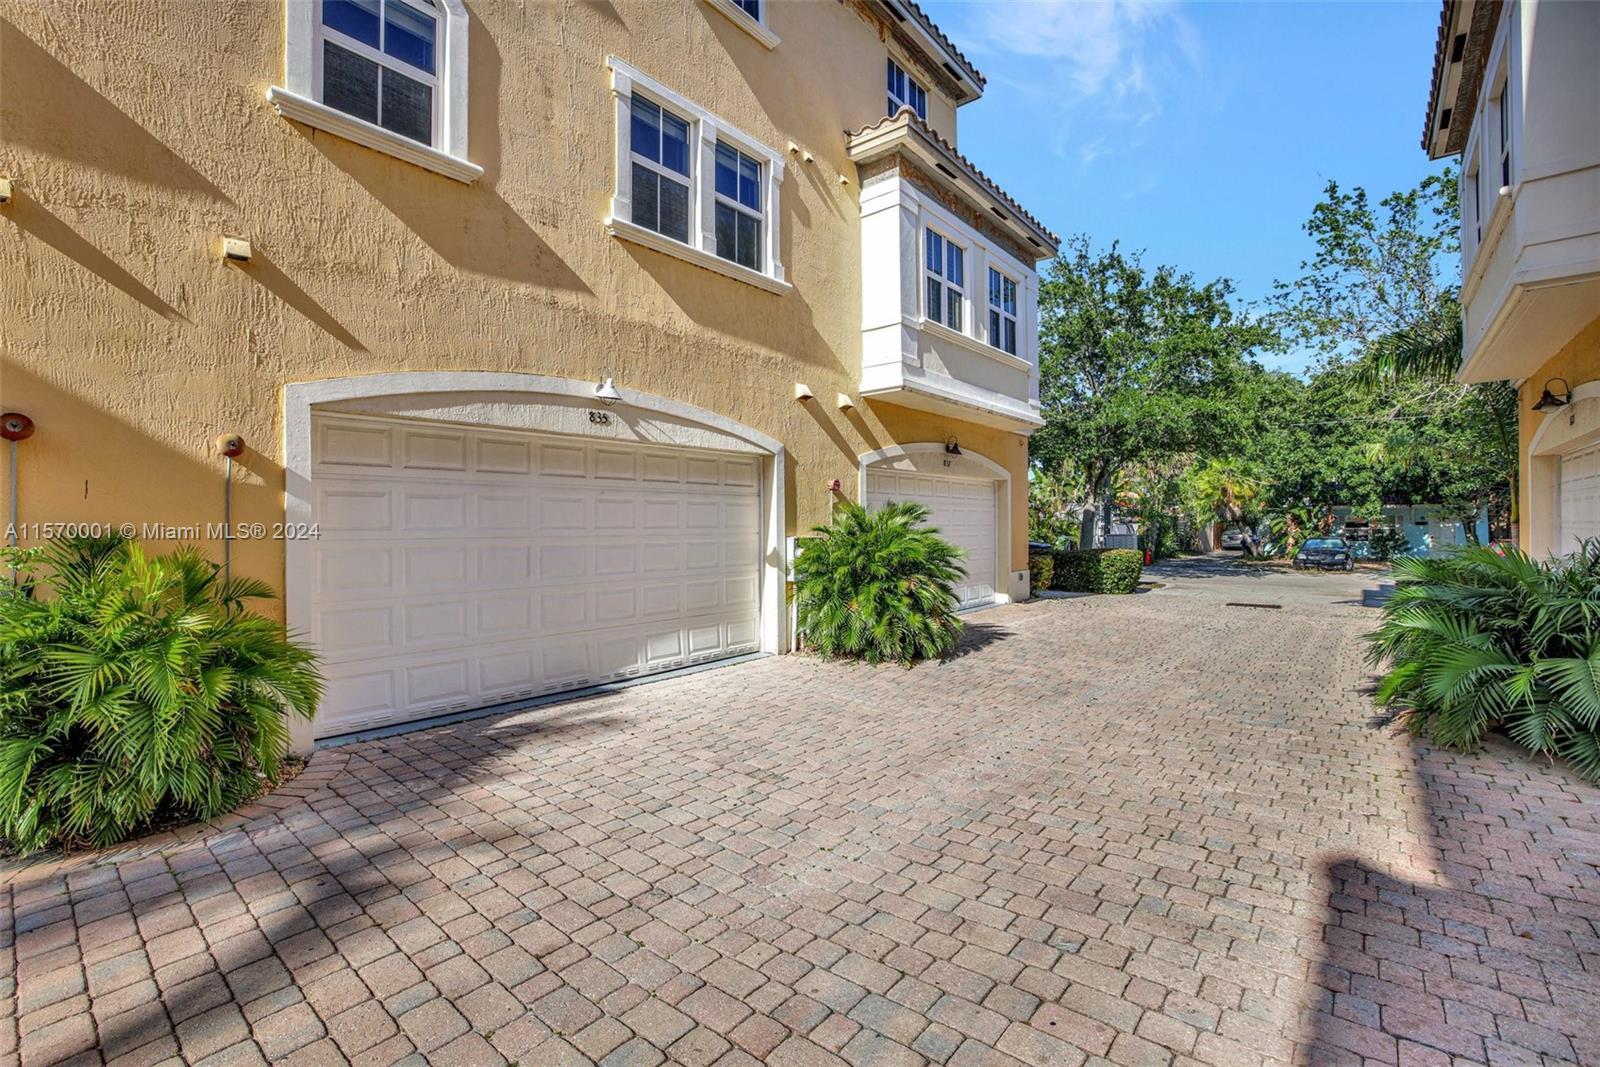 Charming, spacious four bedroom Townhome in the heart of Victoria Park only minutes from Las Olas. E